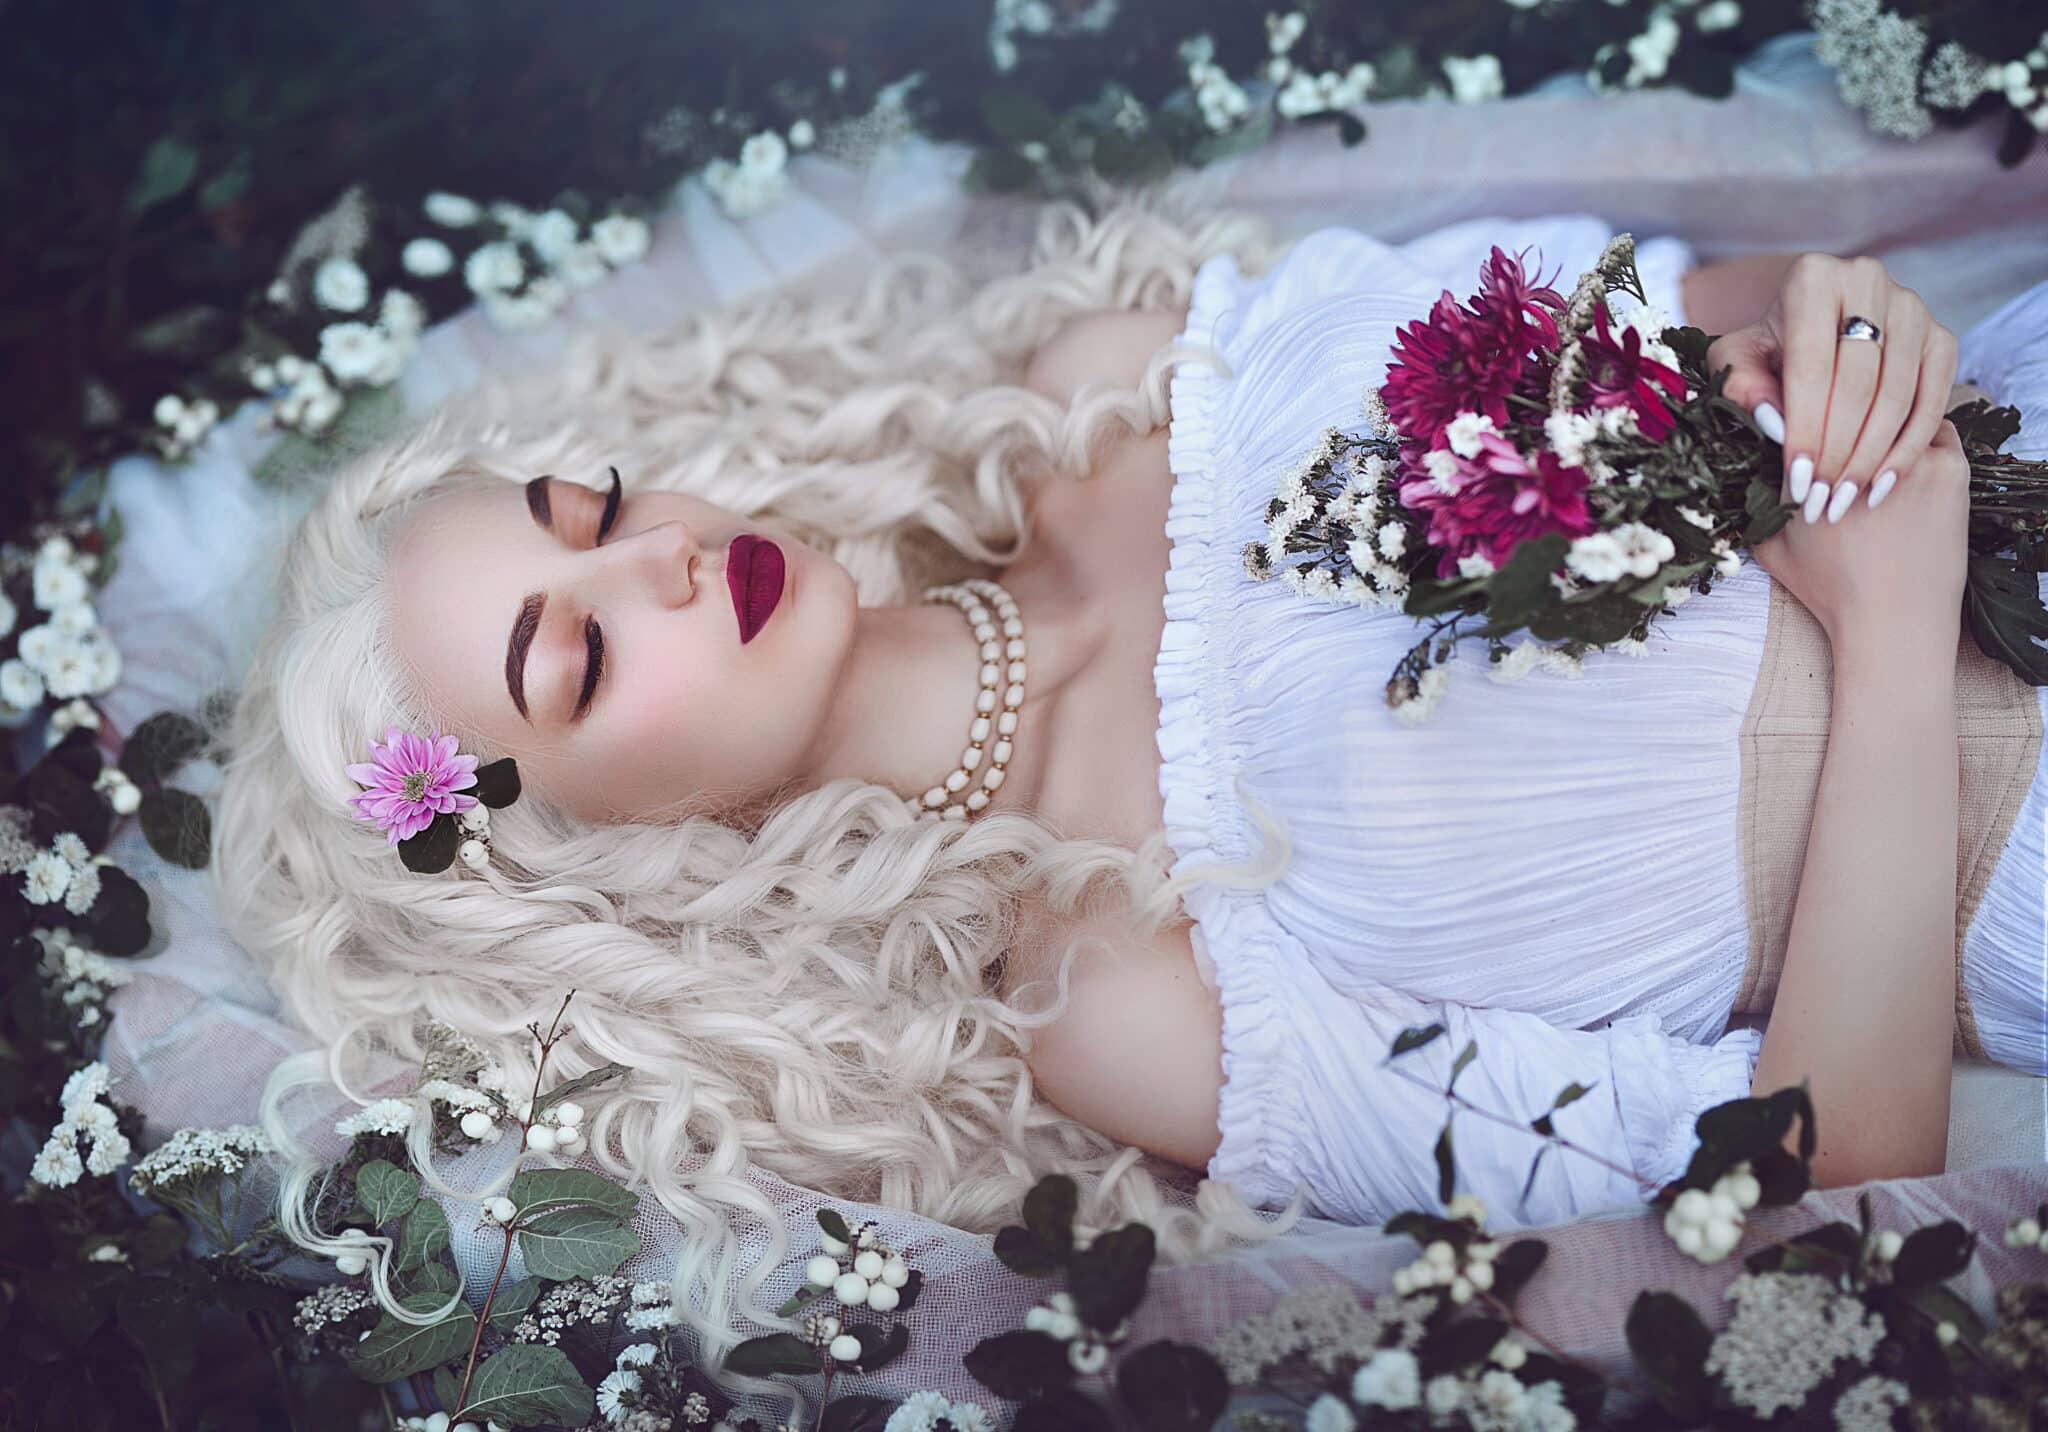 Sleeping beauty. Enchanted Princess lies in a coffin in flowers with a bouquet. 